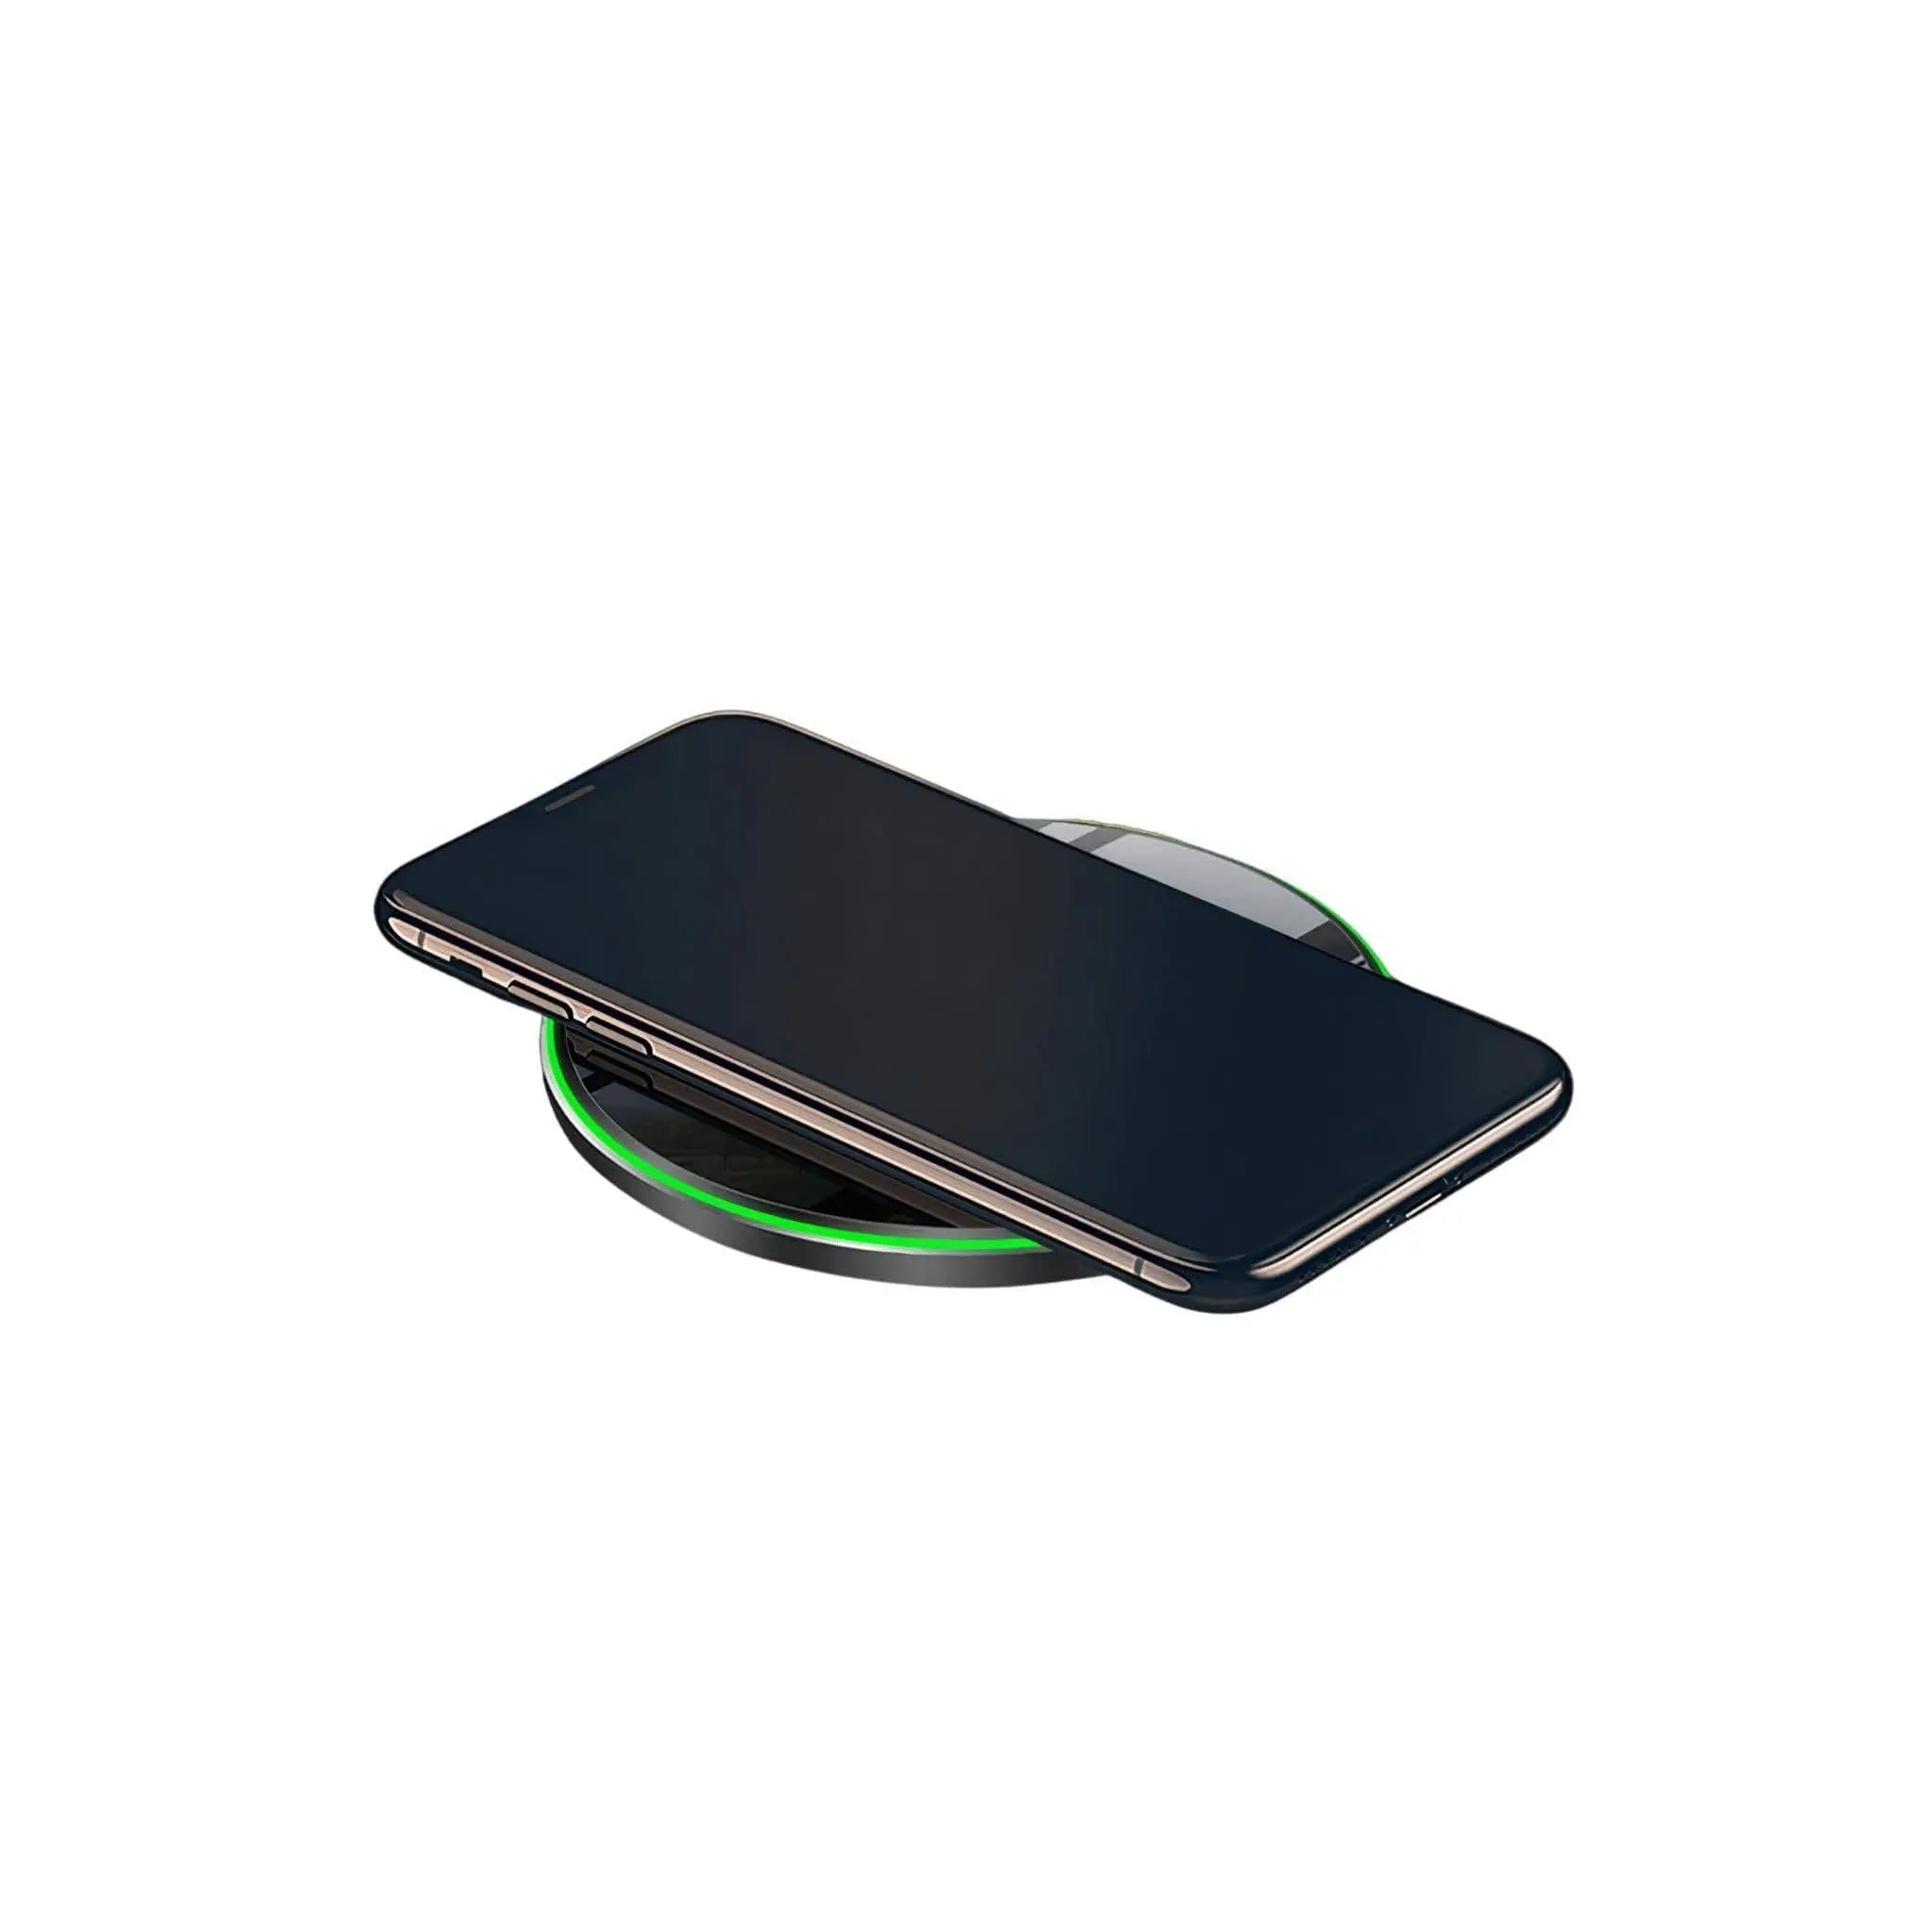 Wireless Qi Charger | Evolved Charger Vital-Power Adapters & Chargers-Evolved Chargers-Evolved Chargers